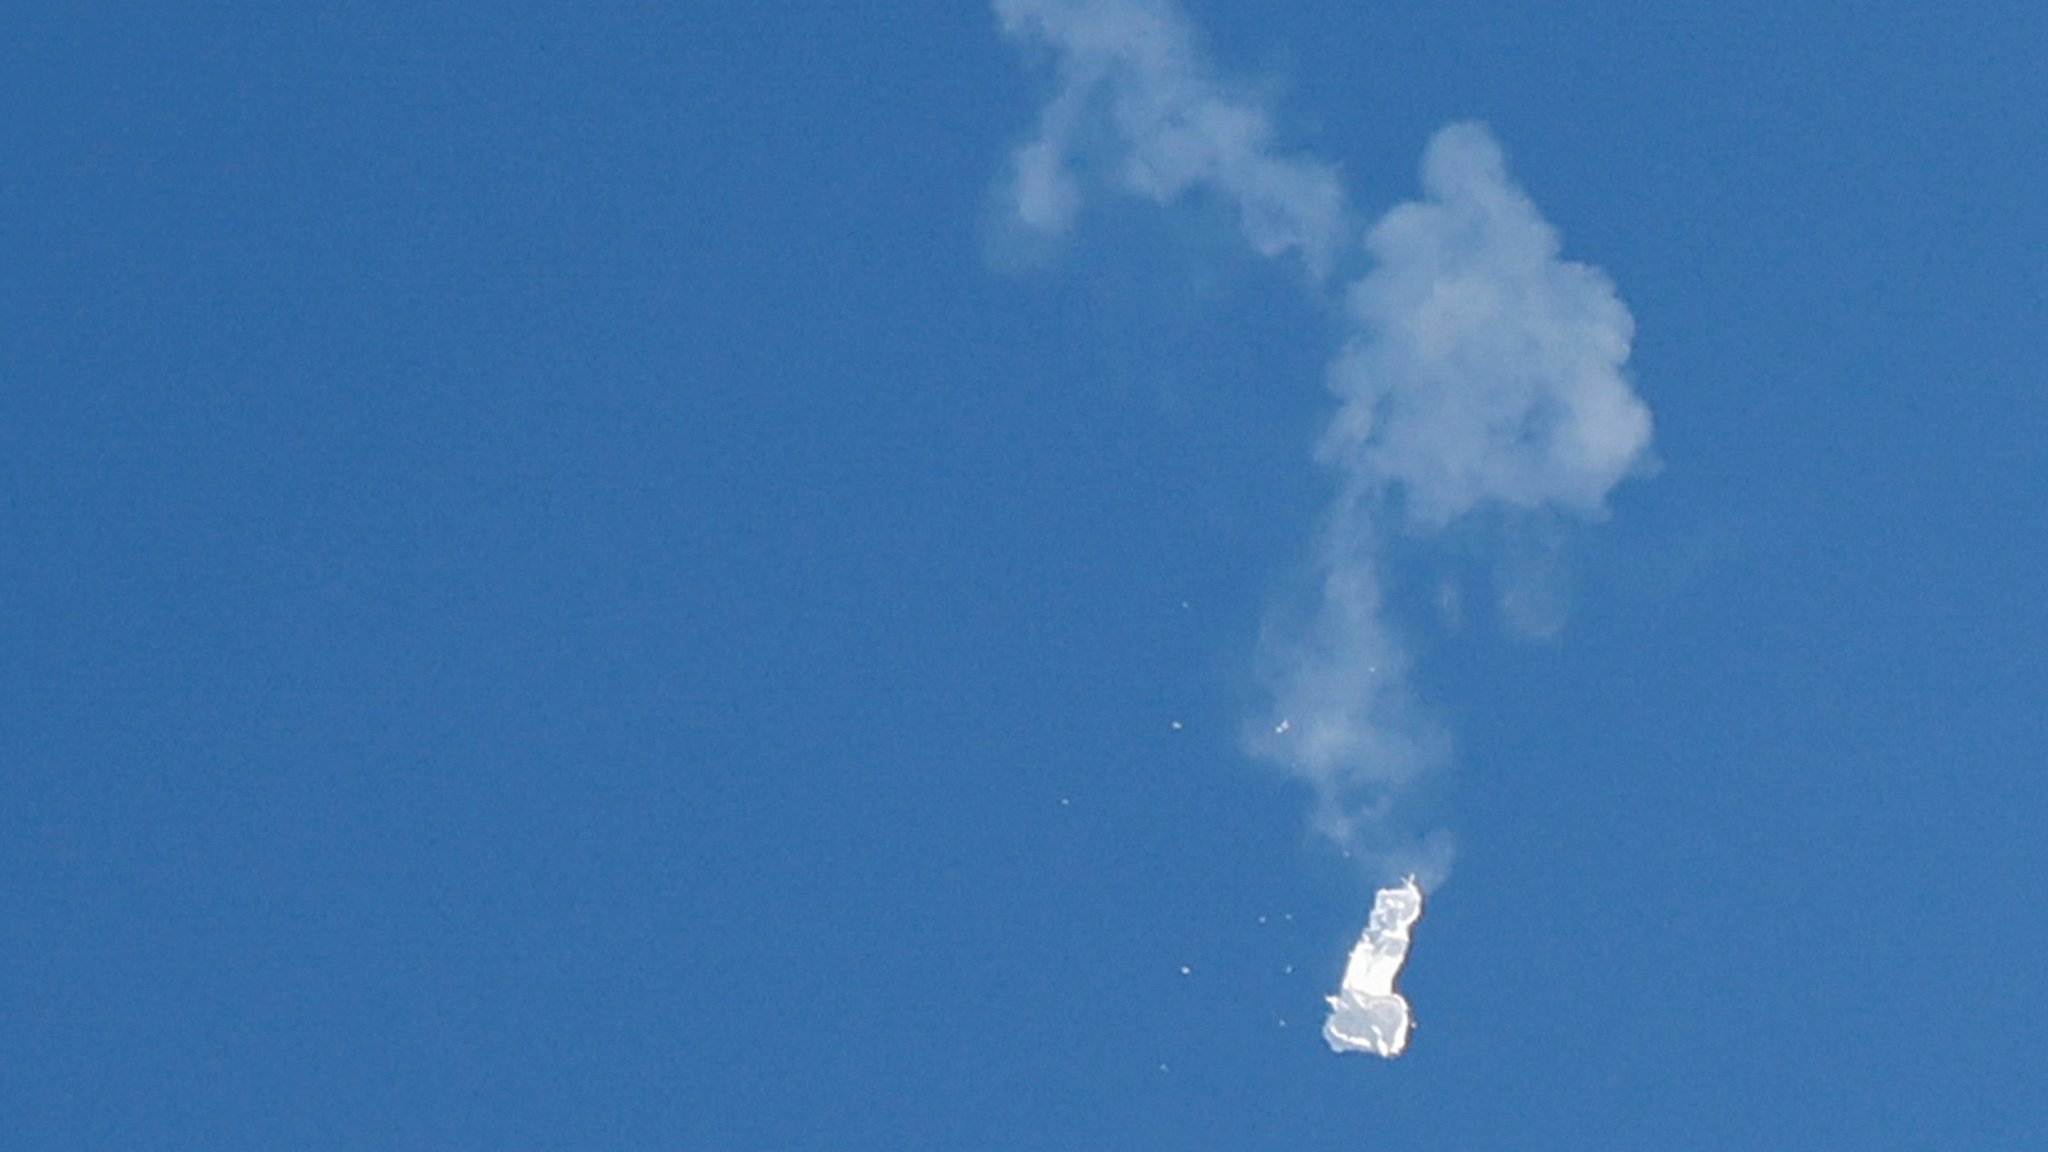 Video appears to show China balloon shot down